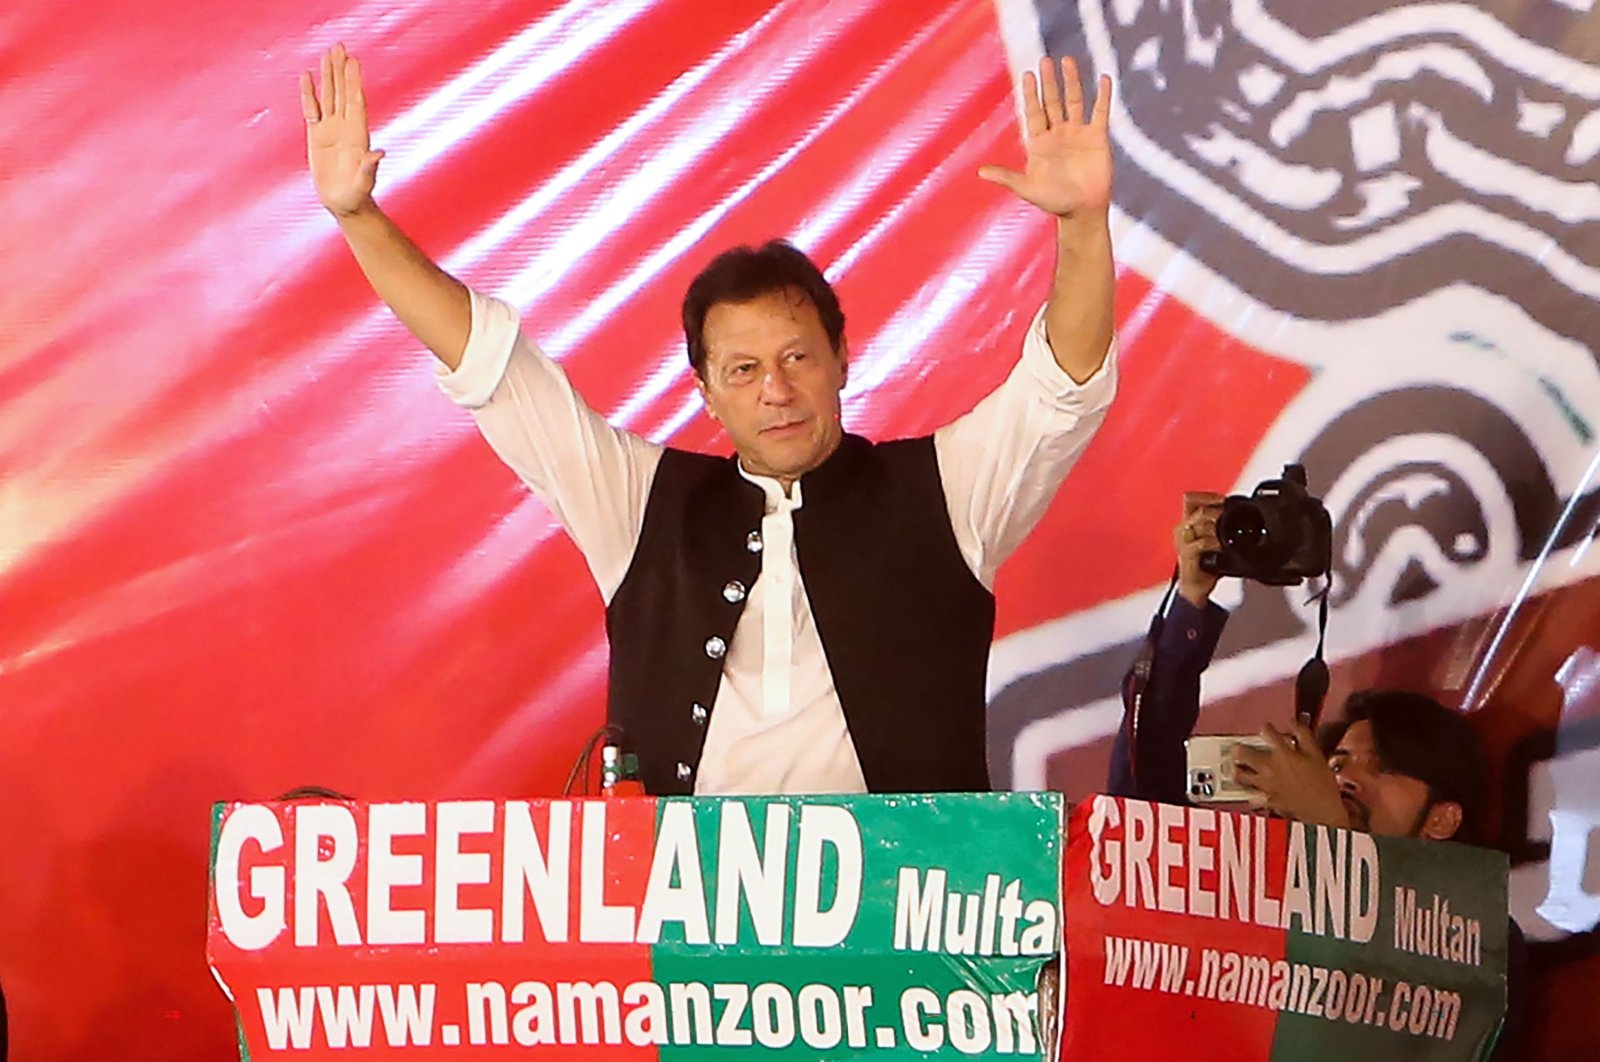 Former Pakistan&#039;s Prime Minister Imran Khan gestures as he addresses supporters of the Pakistan Tehreek-e-Insaf (PTI) party during a rally in Multan, Pakistan, May 20, 2022. (AFP Photo)